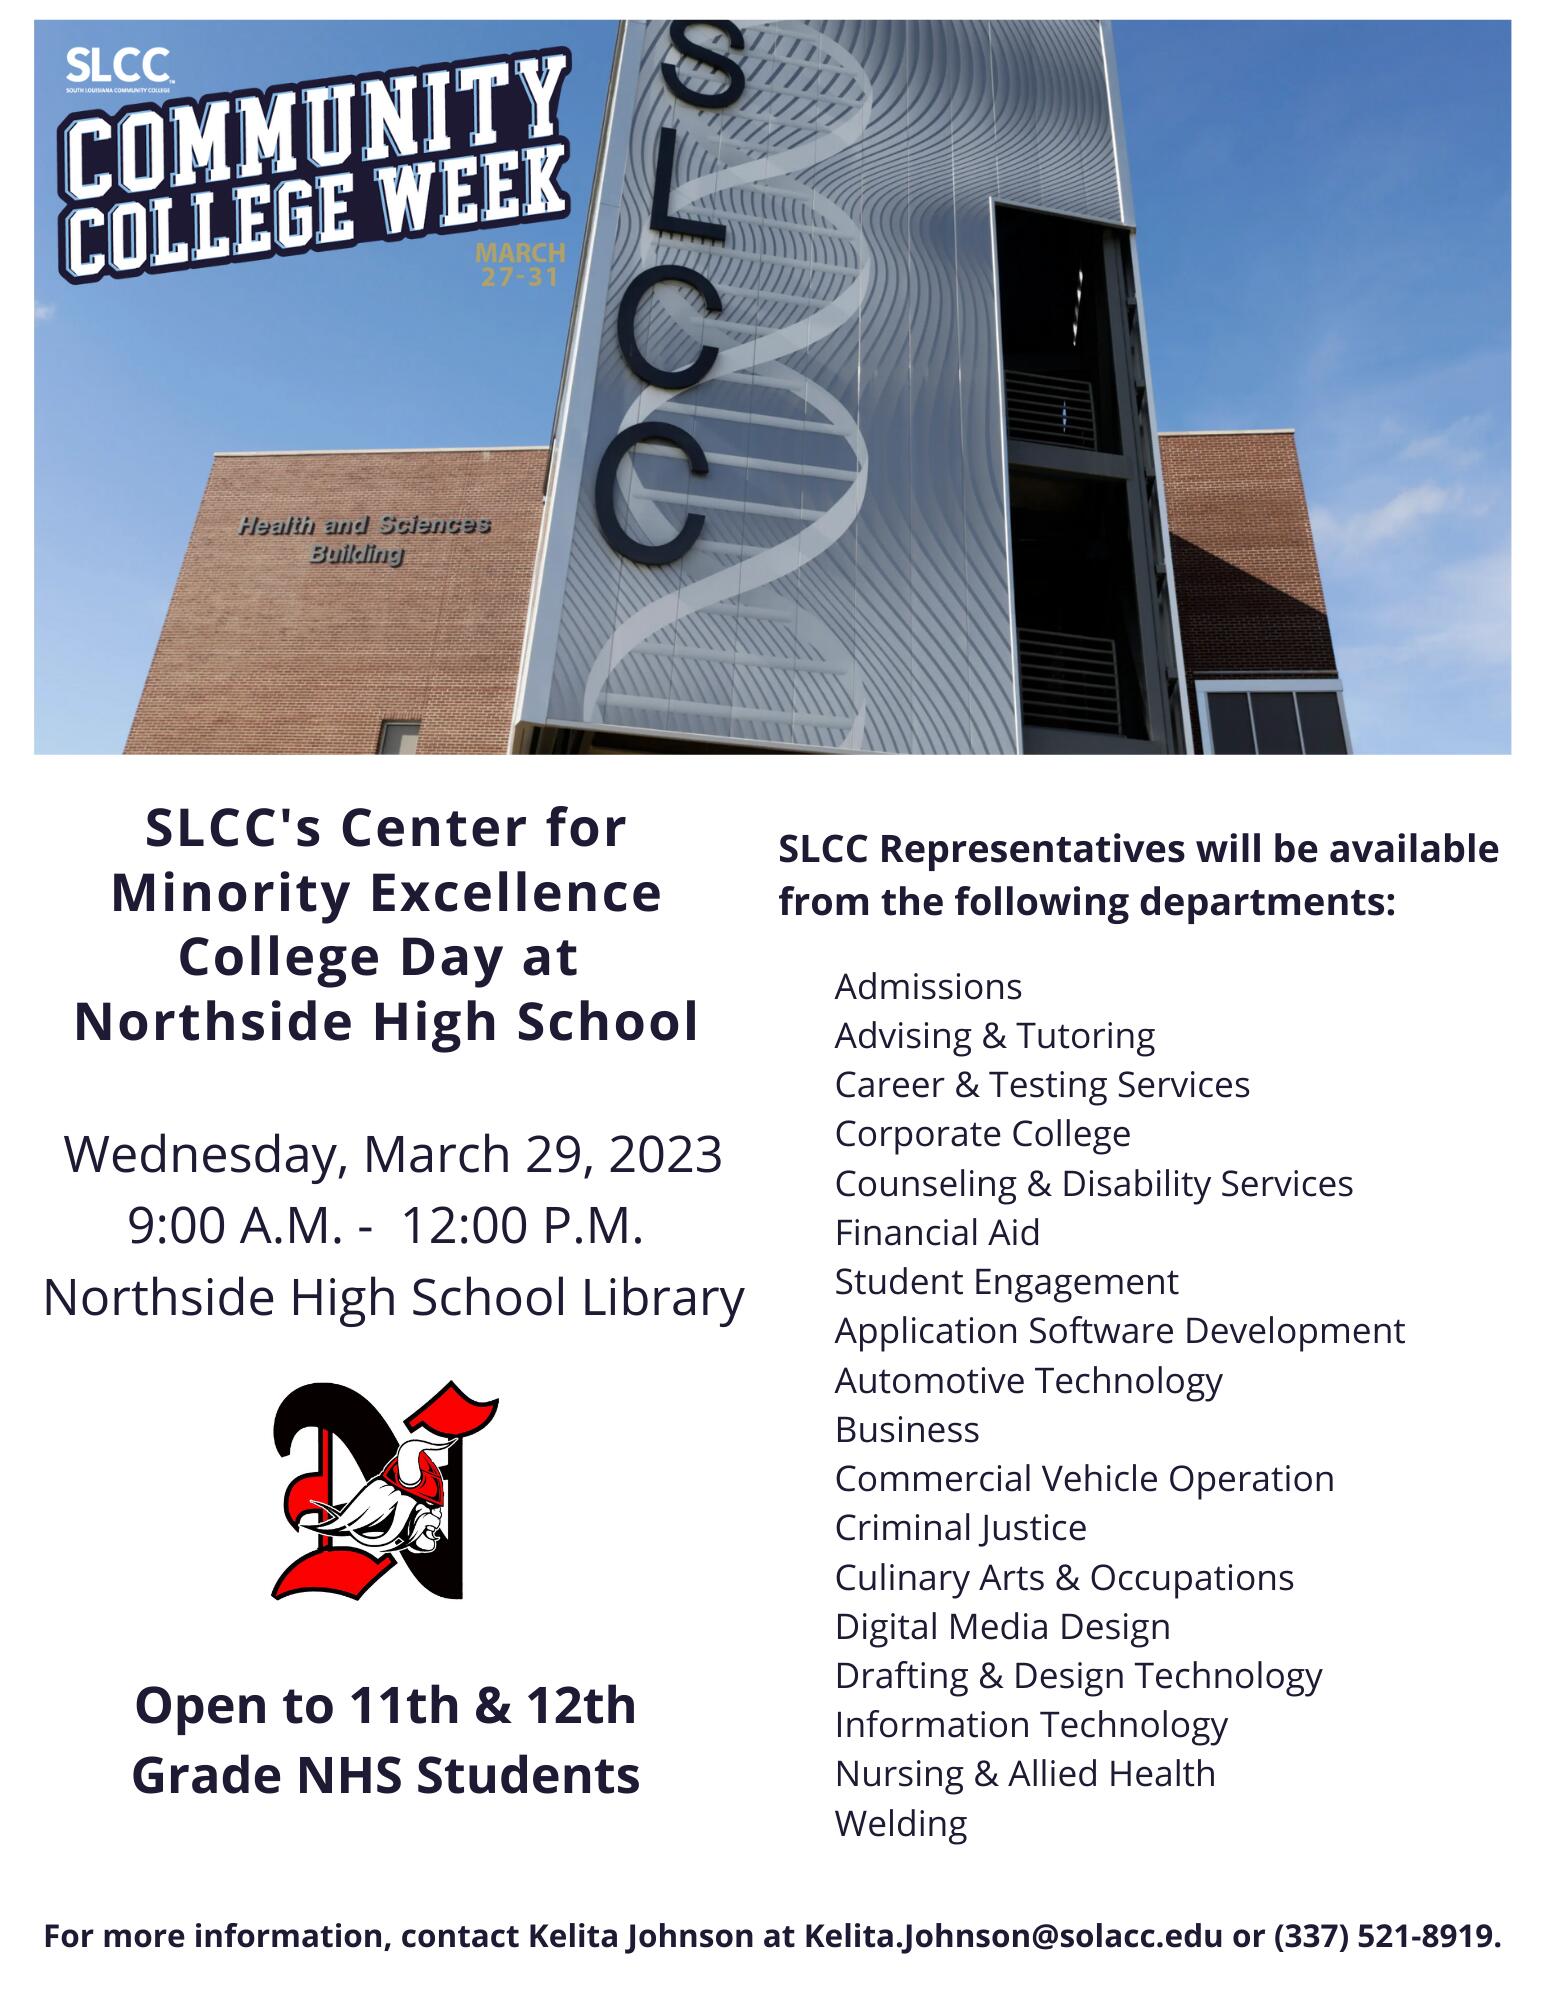 SLLC's Center for Minority Excellence College Day at Northside High School Flyer